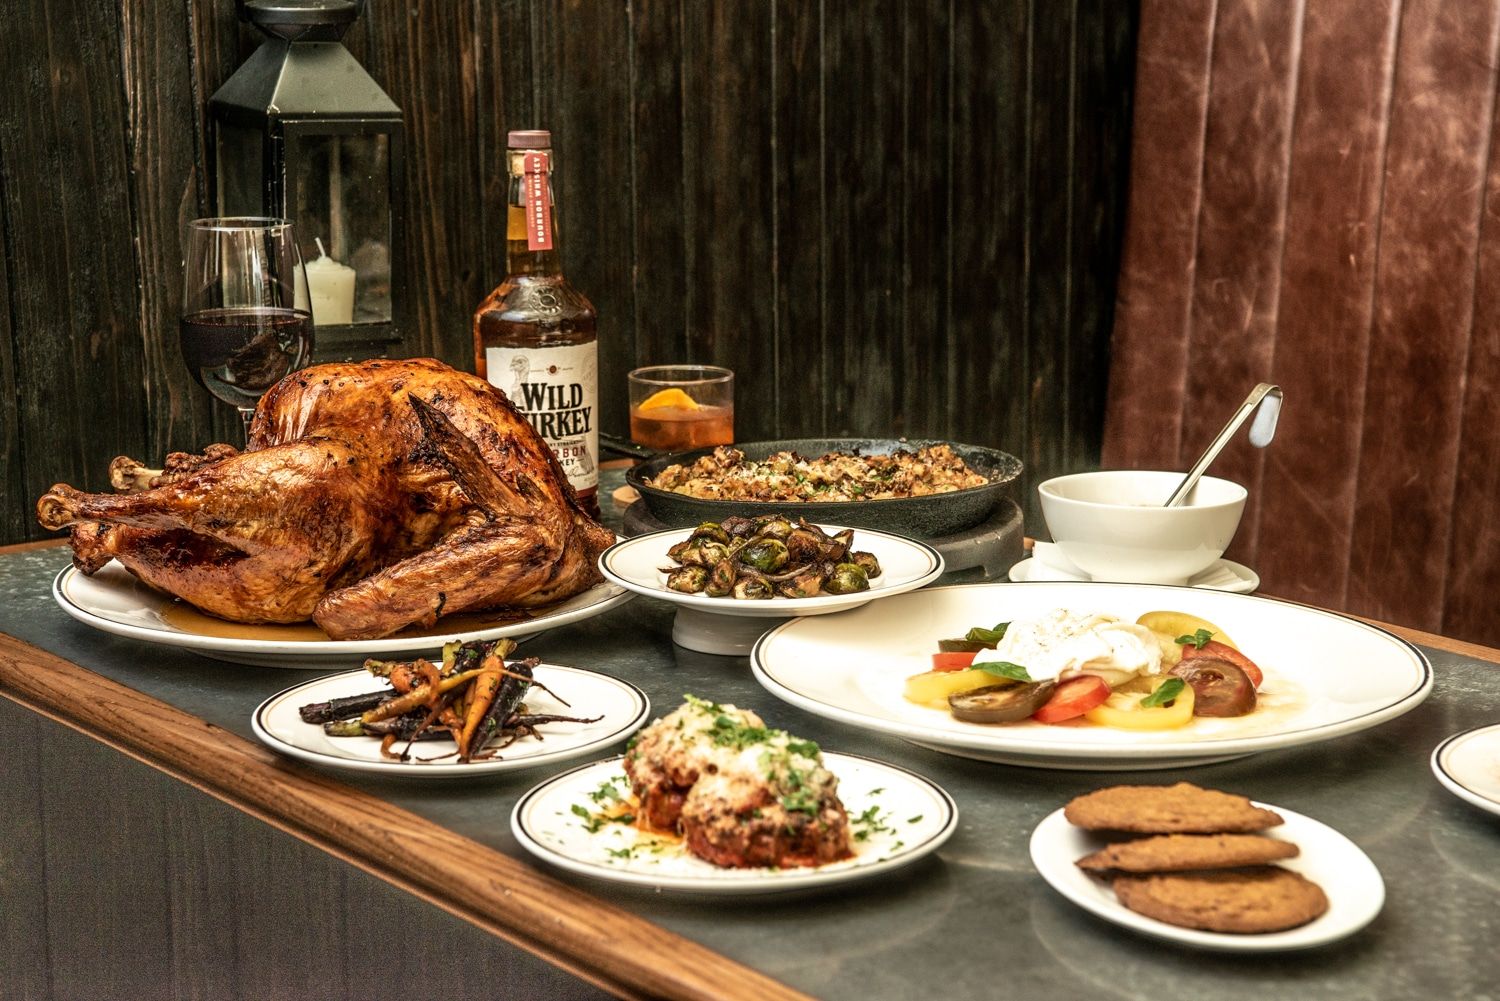 5 turkey dinners to book in Hong Kong for Thanksgiving